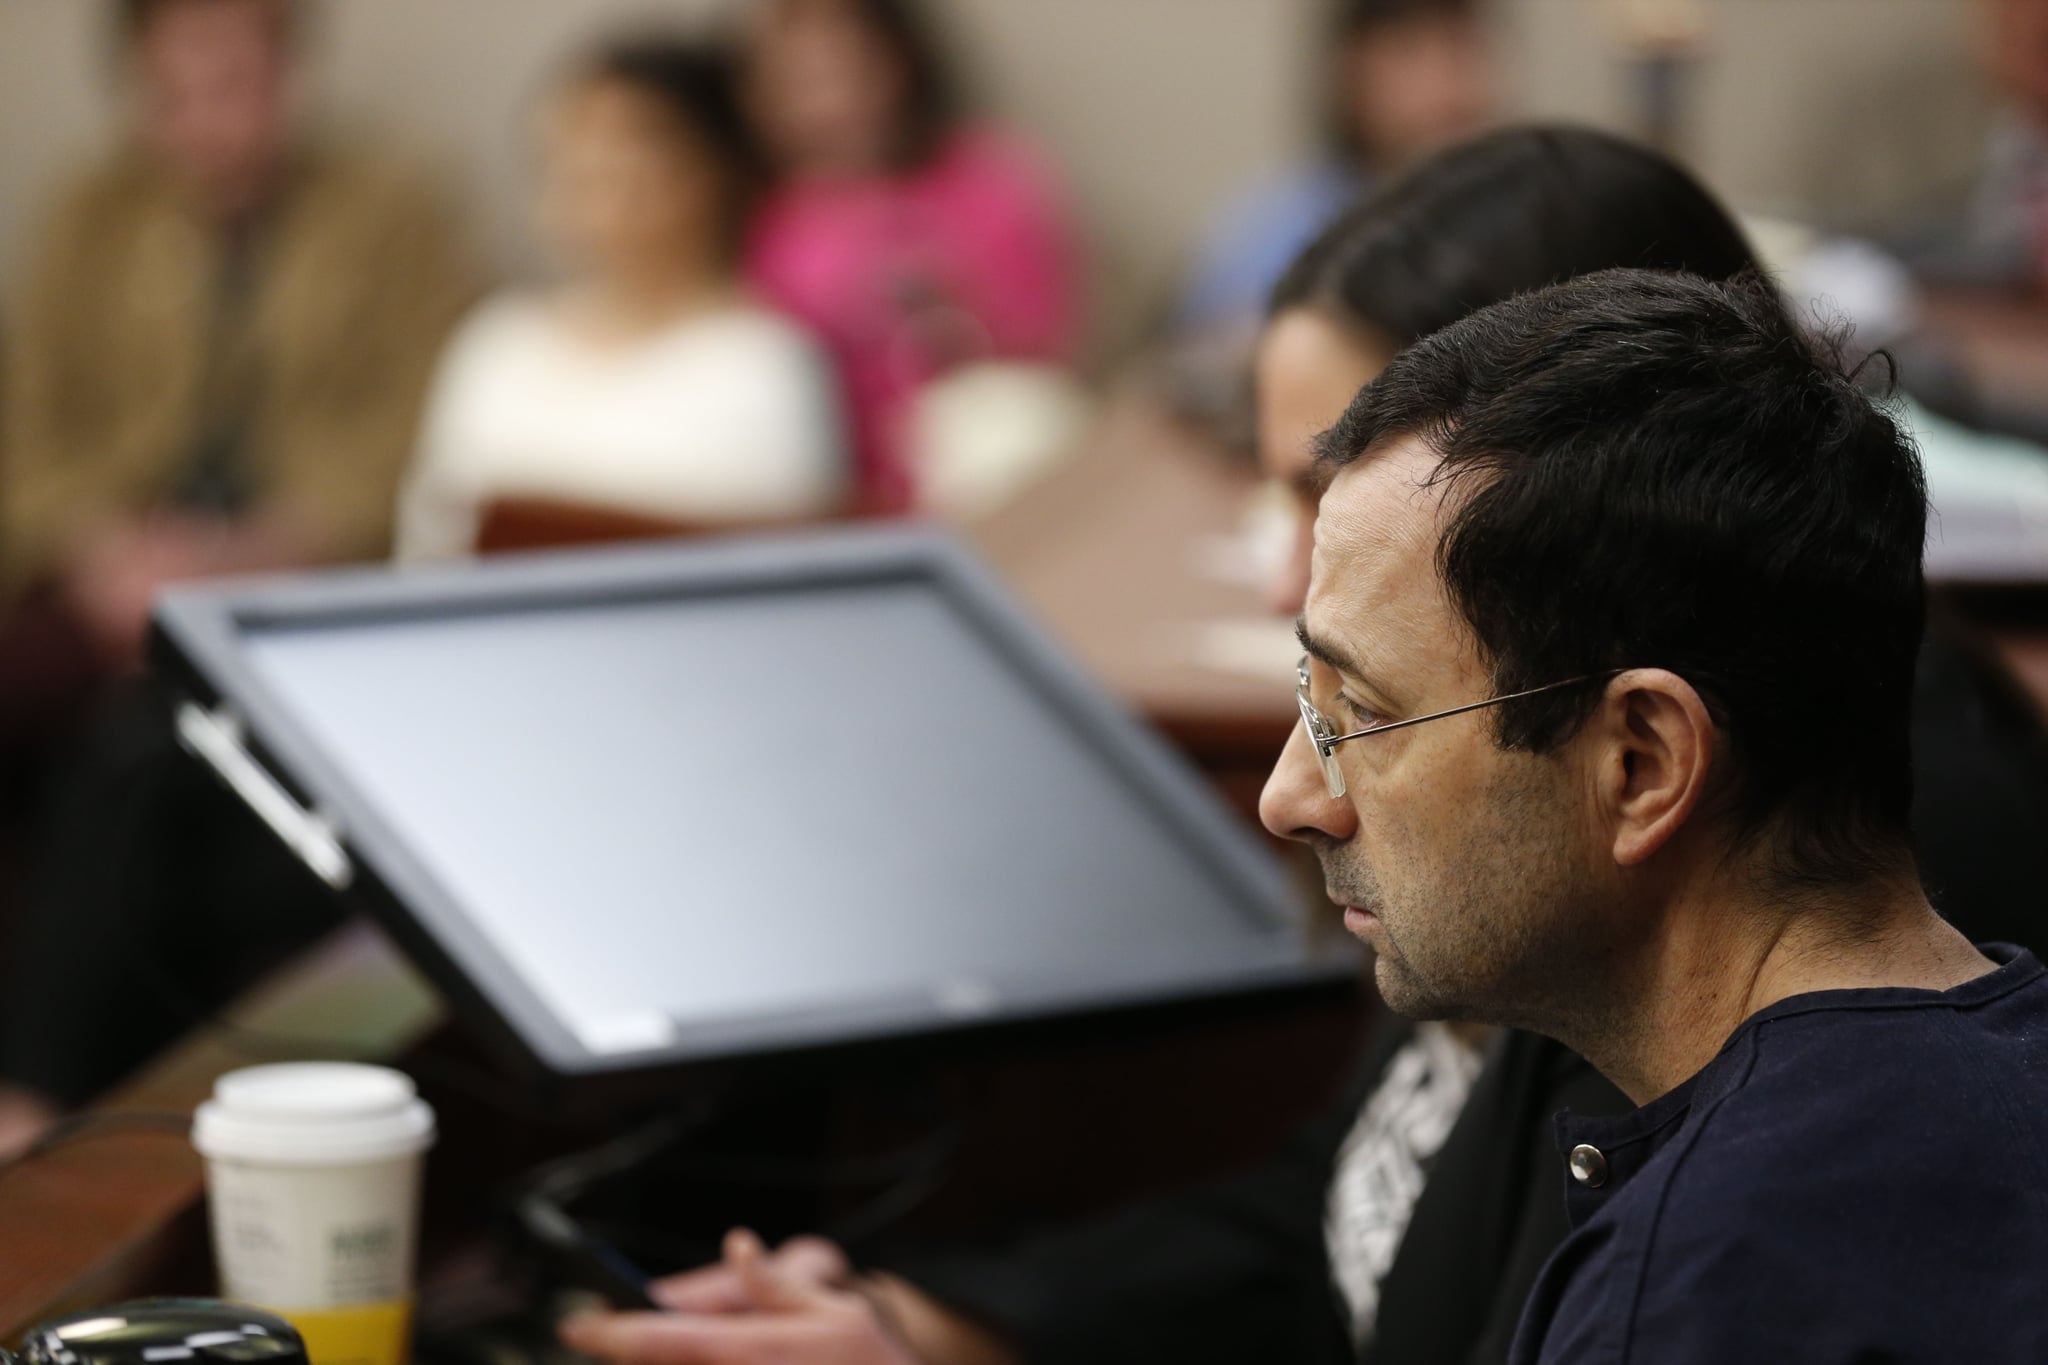 Former Michigan State University and USA Gymnastics doctor Larry Nassar gives an impact statement during the sentencing phase in Ingham County Circuit Court on January 24, 2018 in Lansing, Michigan.More than 100 women and girls accuse Nassar of a pattern of serial abuse dating back two decades, including the Olympic gold-medal winners Simone Biles, Aly Raisman, Gabby Douglas and McKayla Maroney -- who have lashed out at top sporting officials for failing to stop him.    / AFP PHOTO / JEFF KOWALSKY        (Photo credit should read JEFF KOWALSKY/AFP via Getty Images)